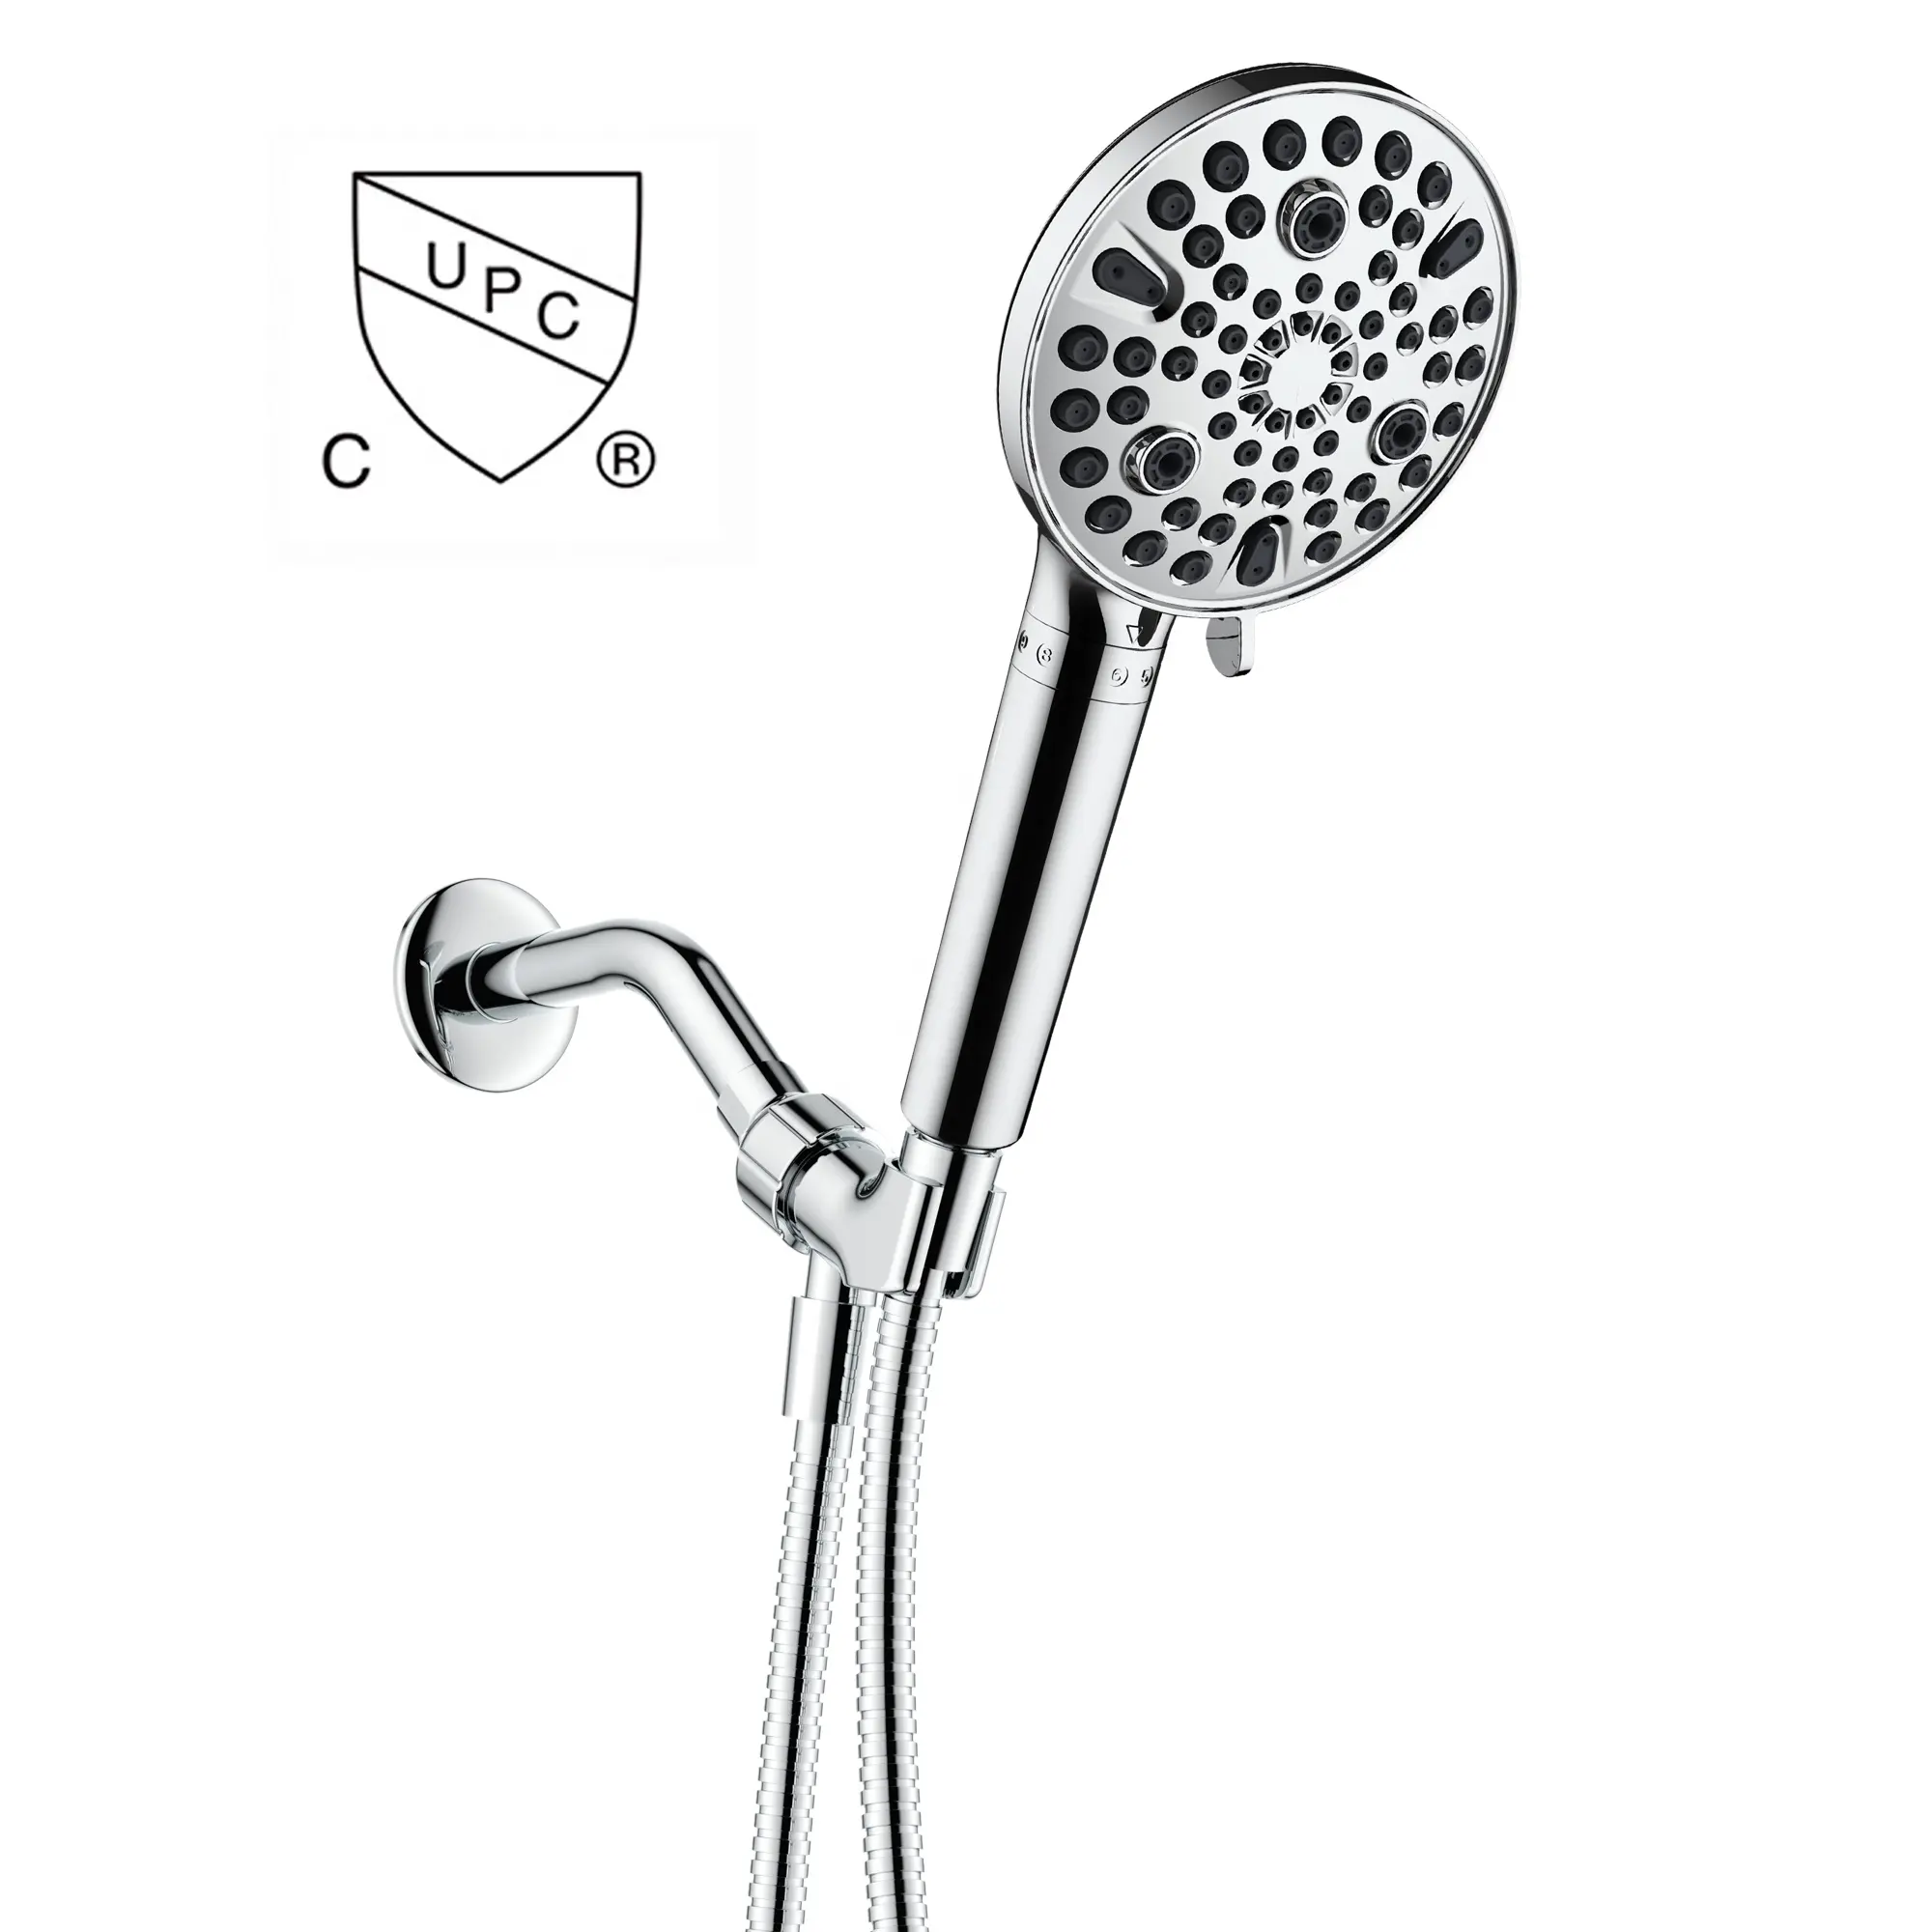 Amazon Hot Selling Hign Pressure Rain Shower With KDF Filtered 9 Spray Water Function Adjustable Hand Held Shower Head